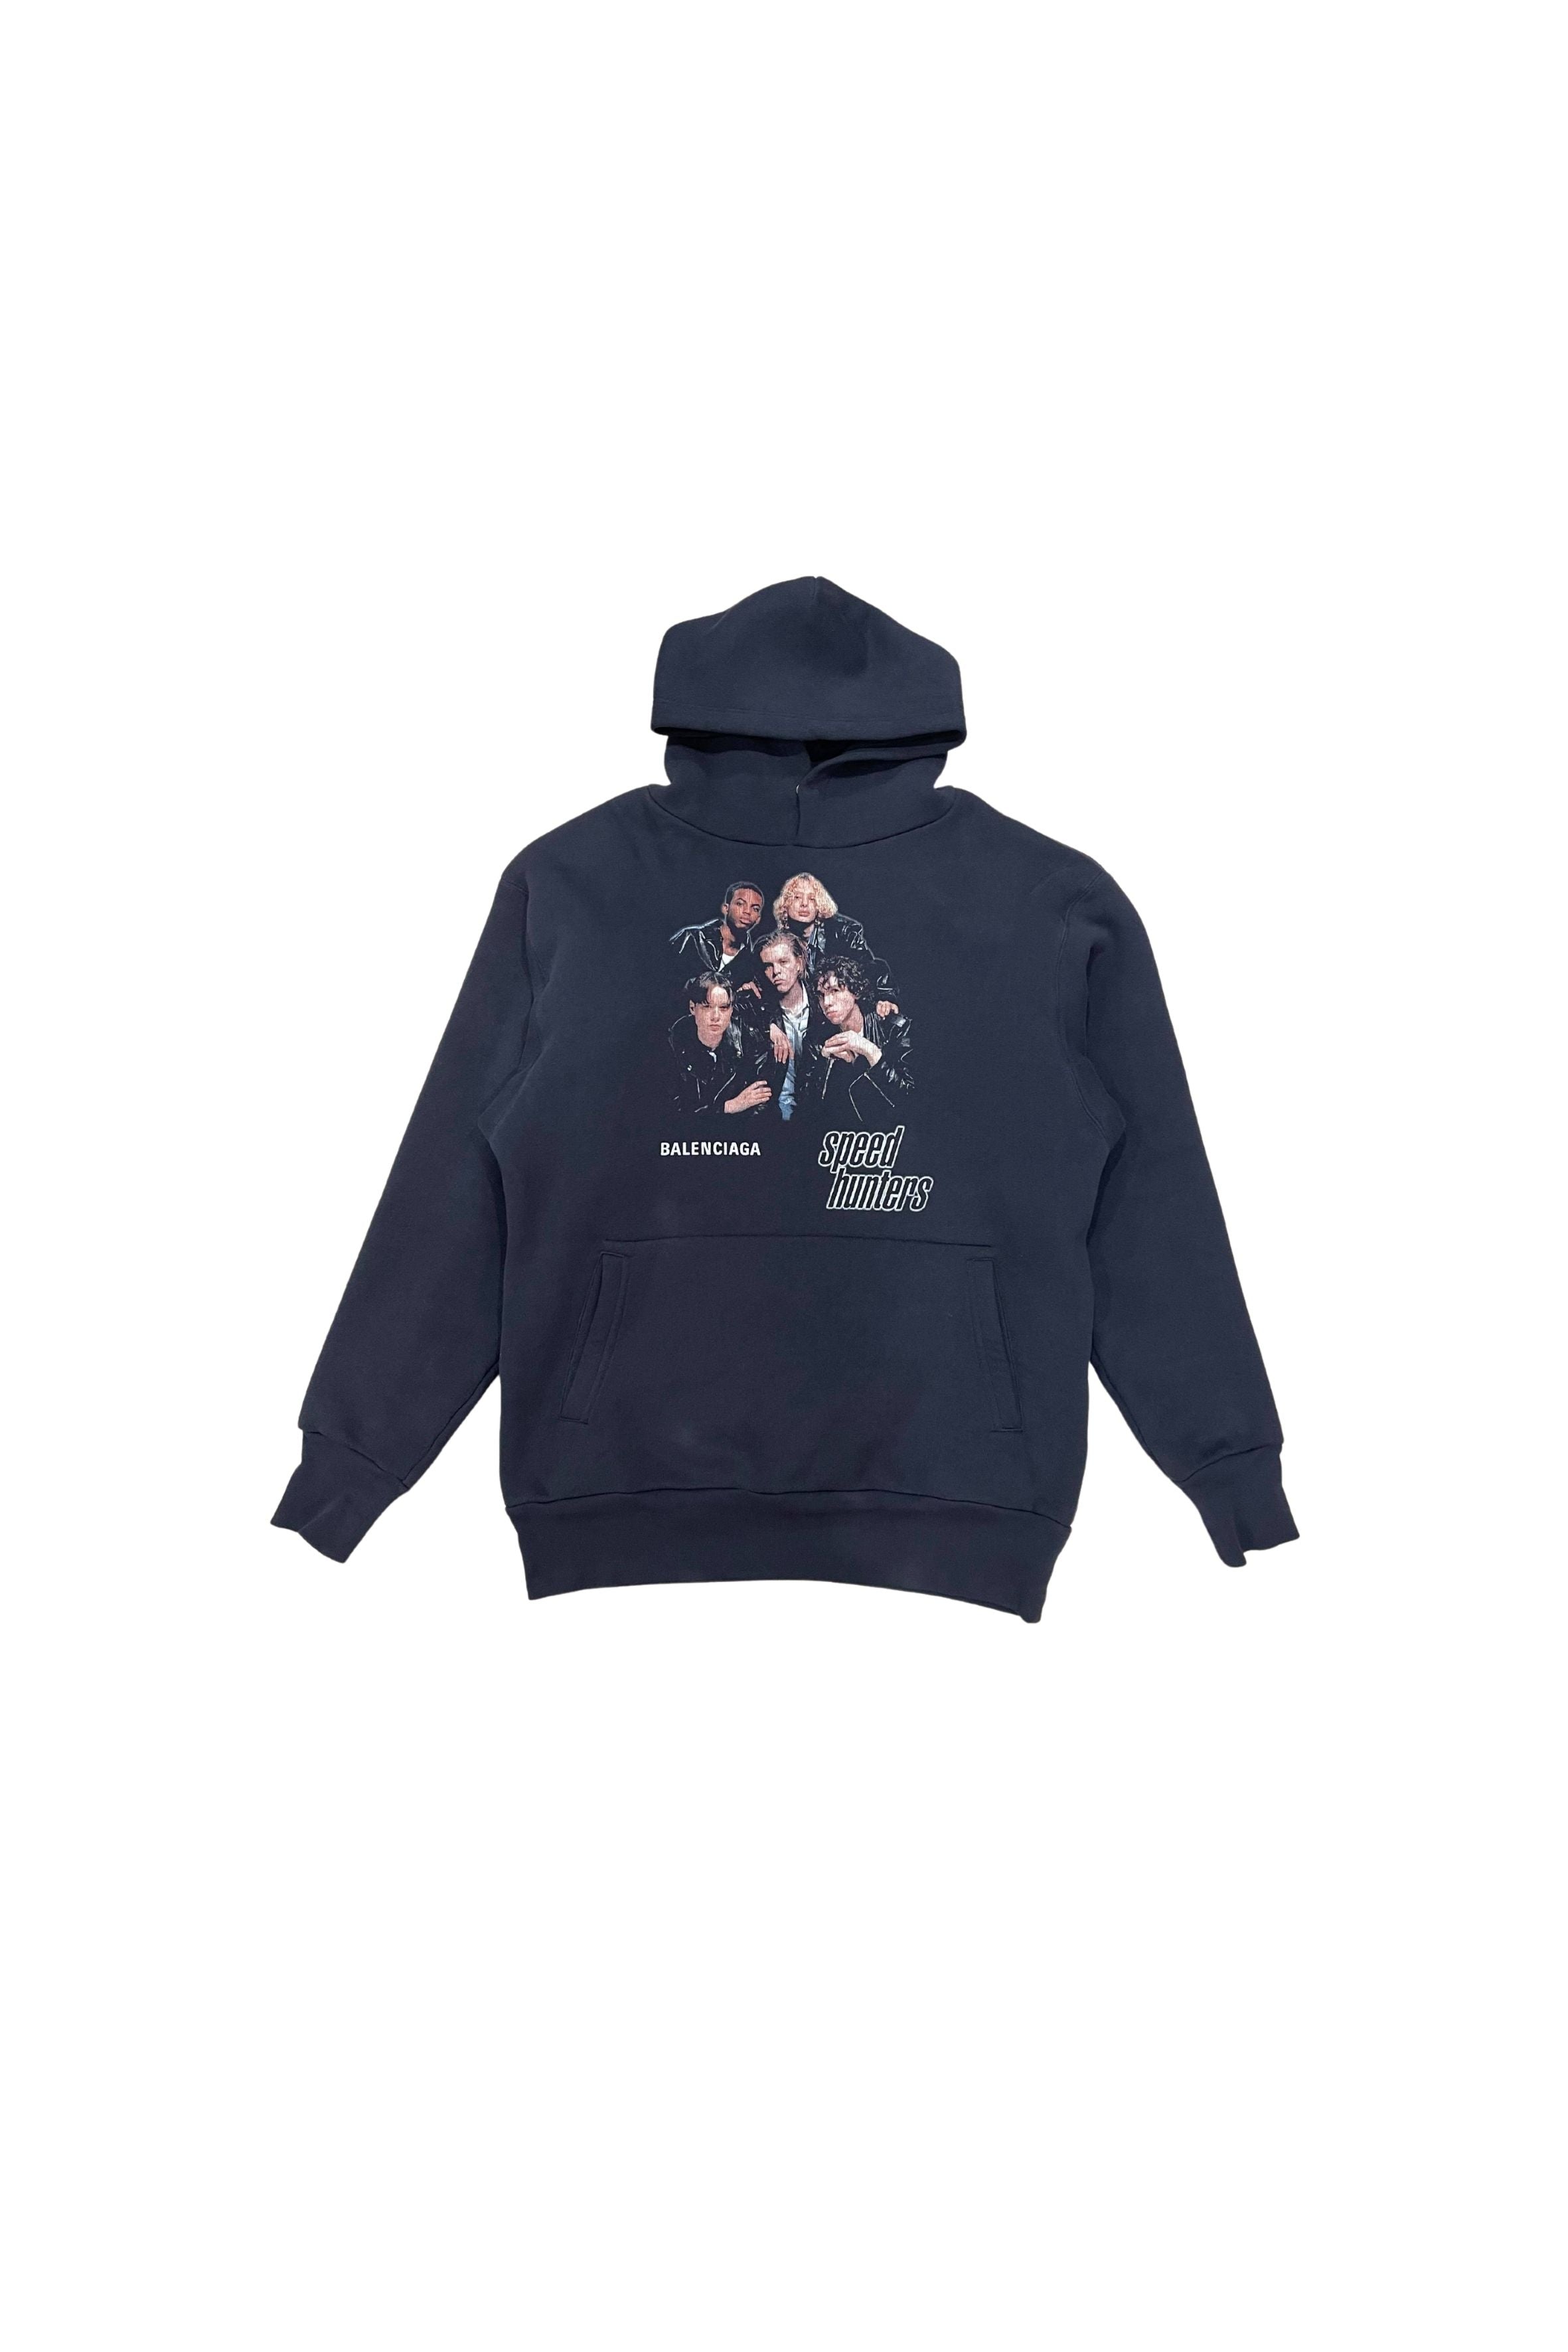 Balenciaga FW18 Speed Hunters Oversized Cotton-Blend Hoodie (Double Layer)